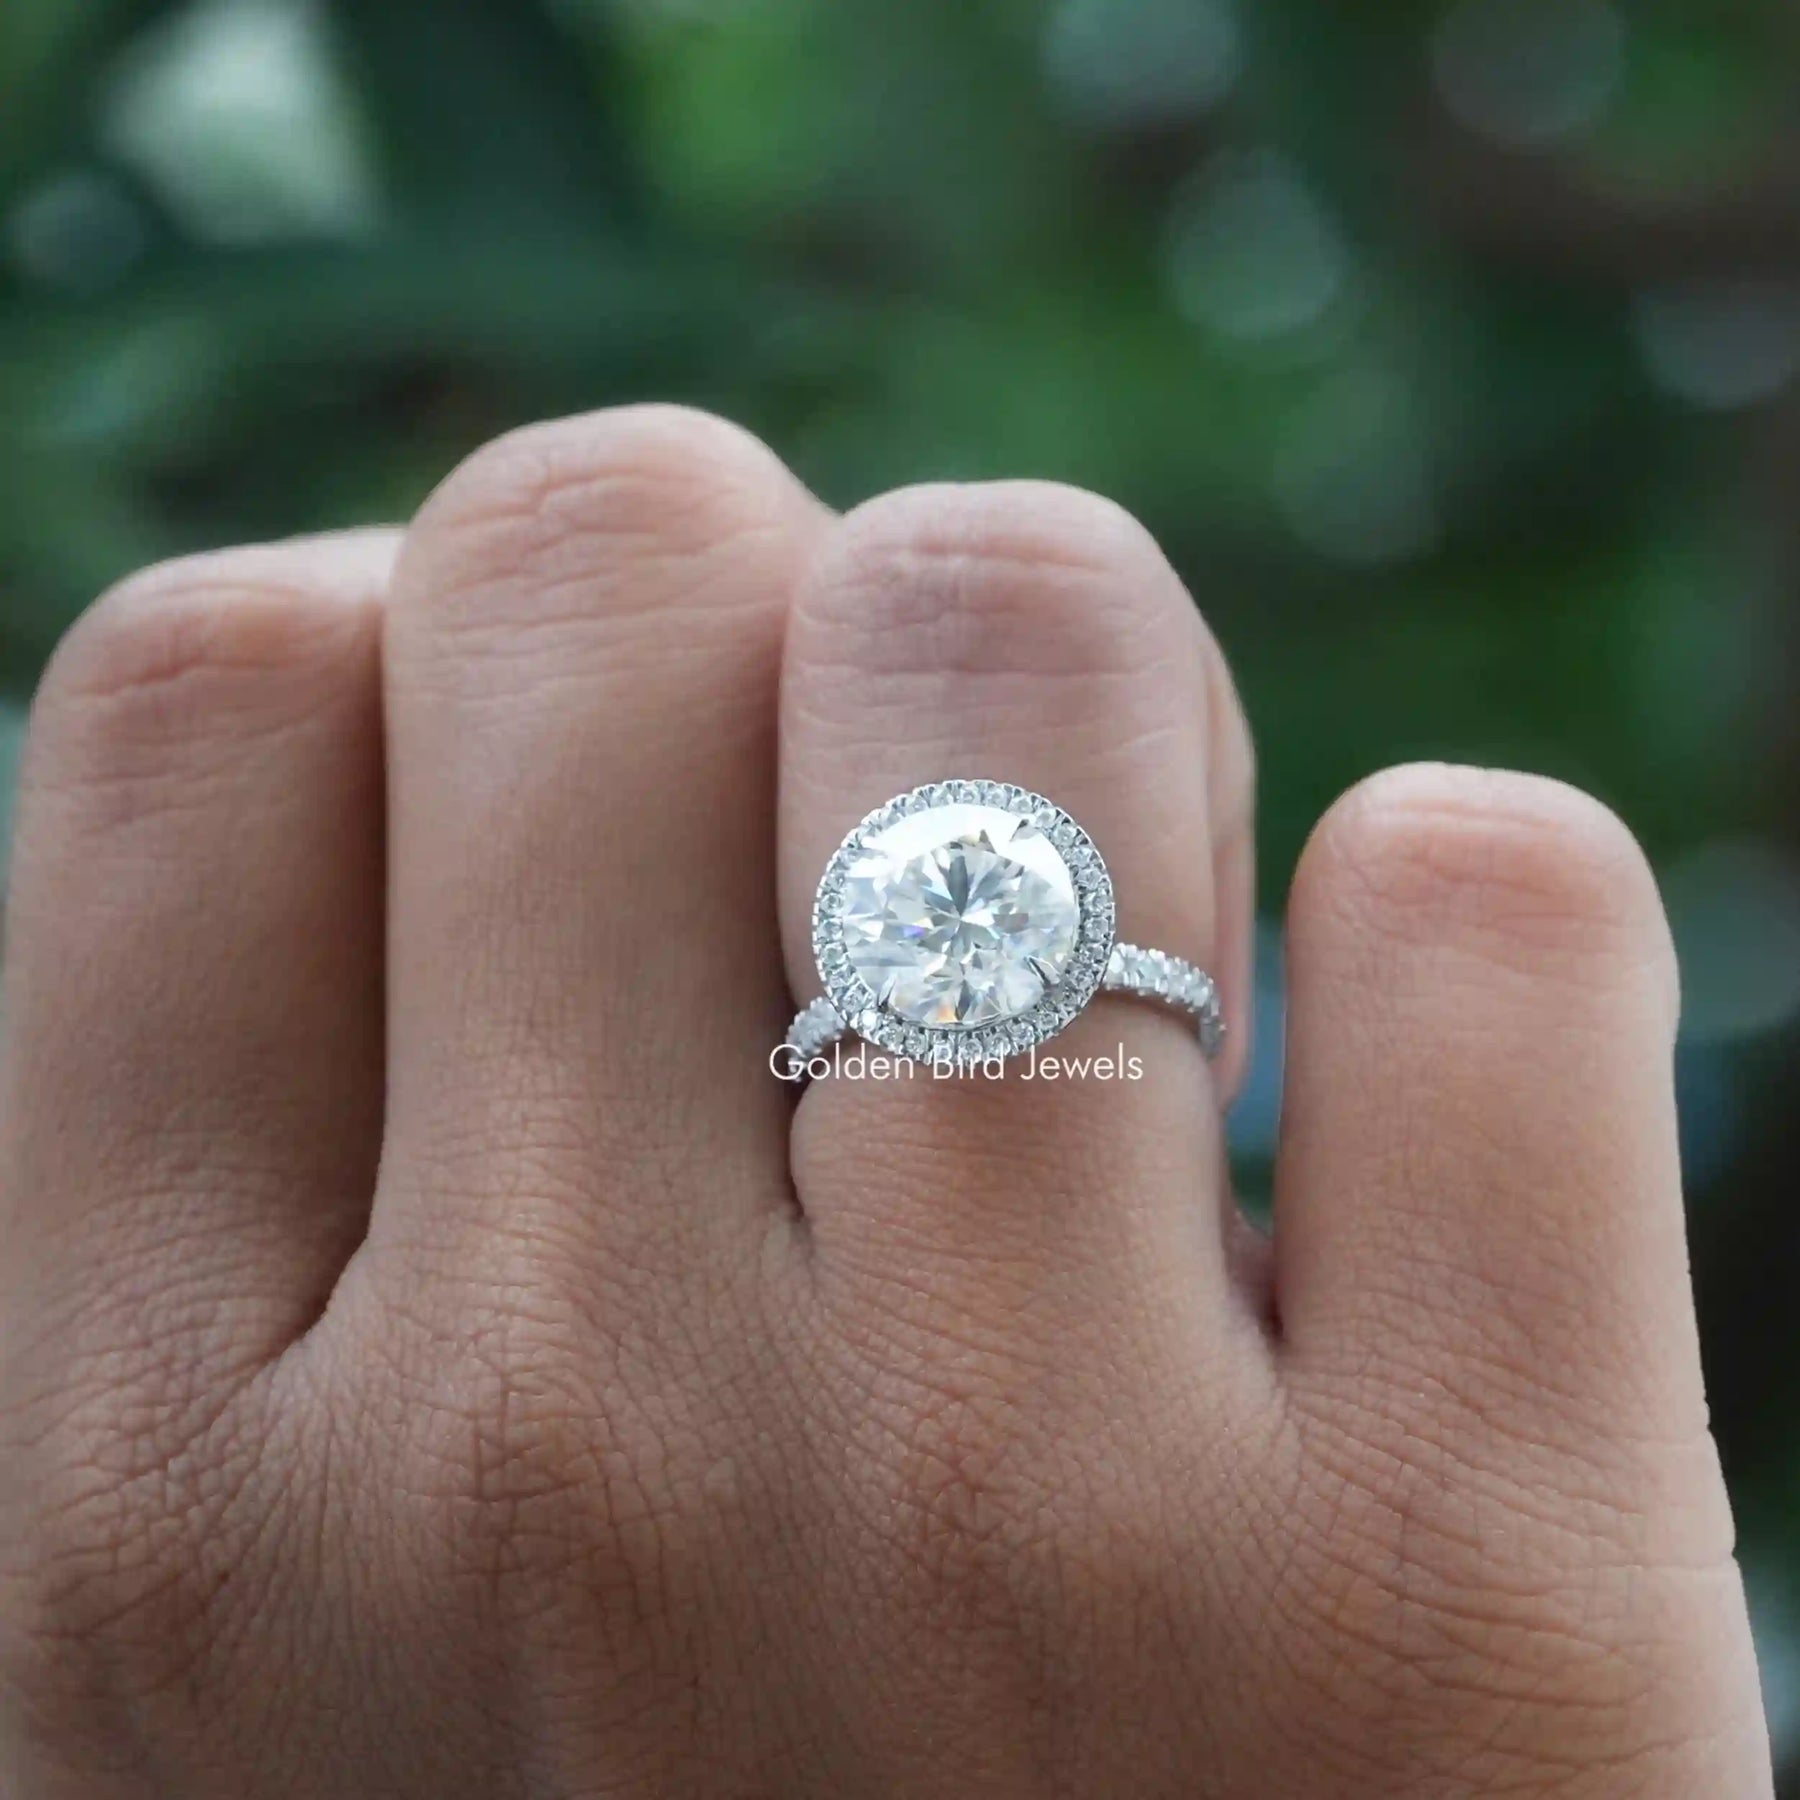 [Colorless round cut moissanite halo ring in 14k white gold]-[Golden Bird Jewels]